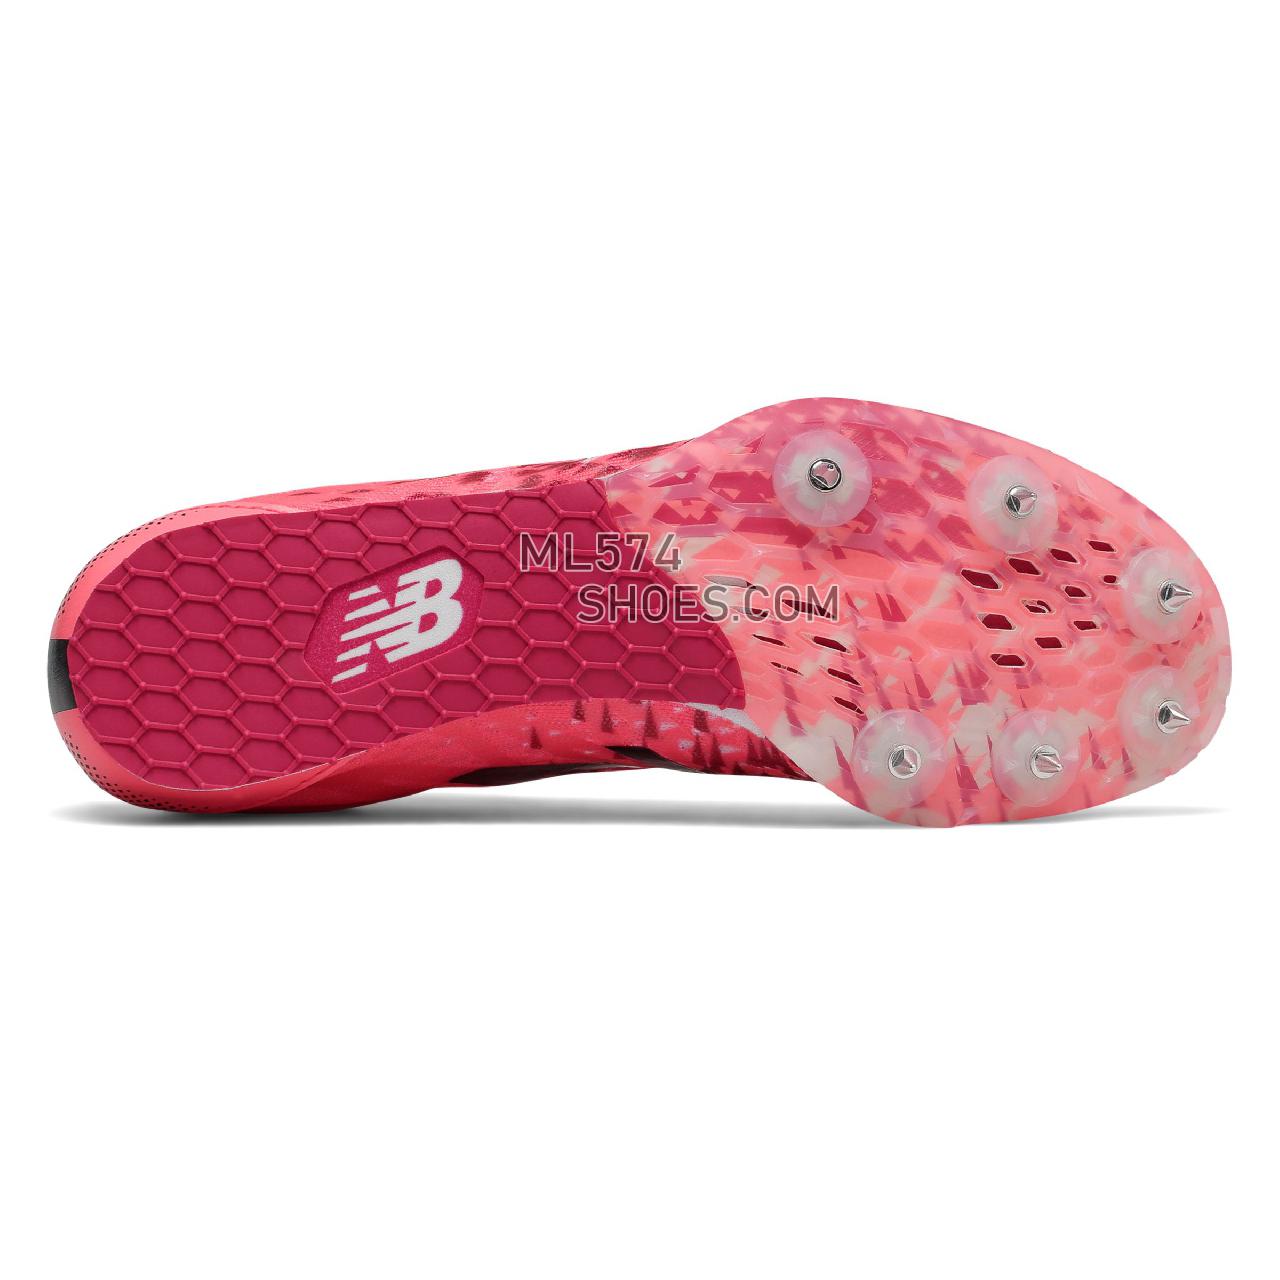 New Balance MD500v5 Spike - Women's Md500V5 Spike - Running - Guava with Pink - WMD500F5